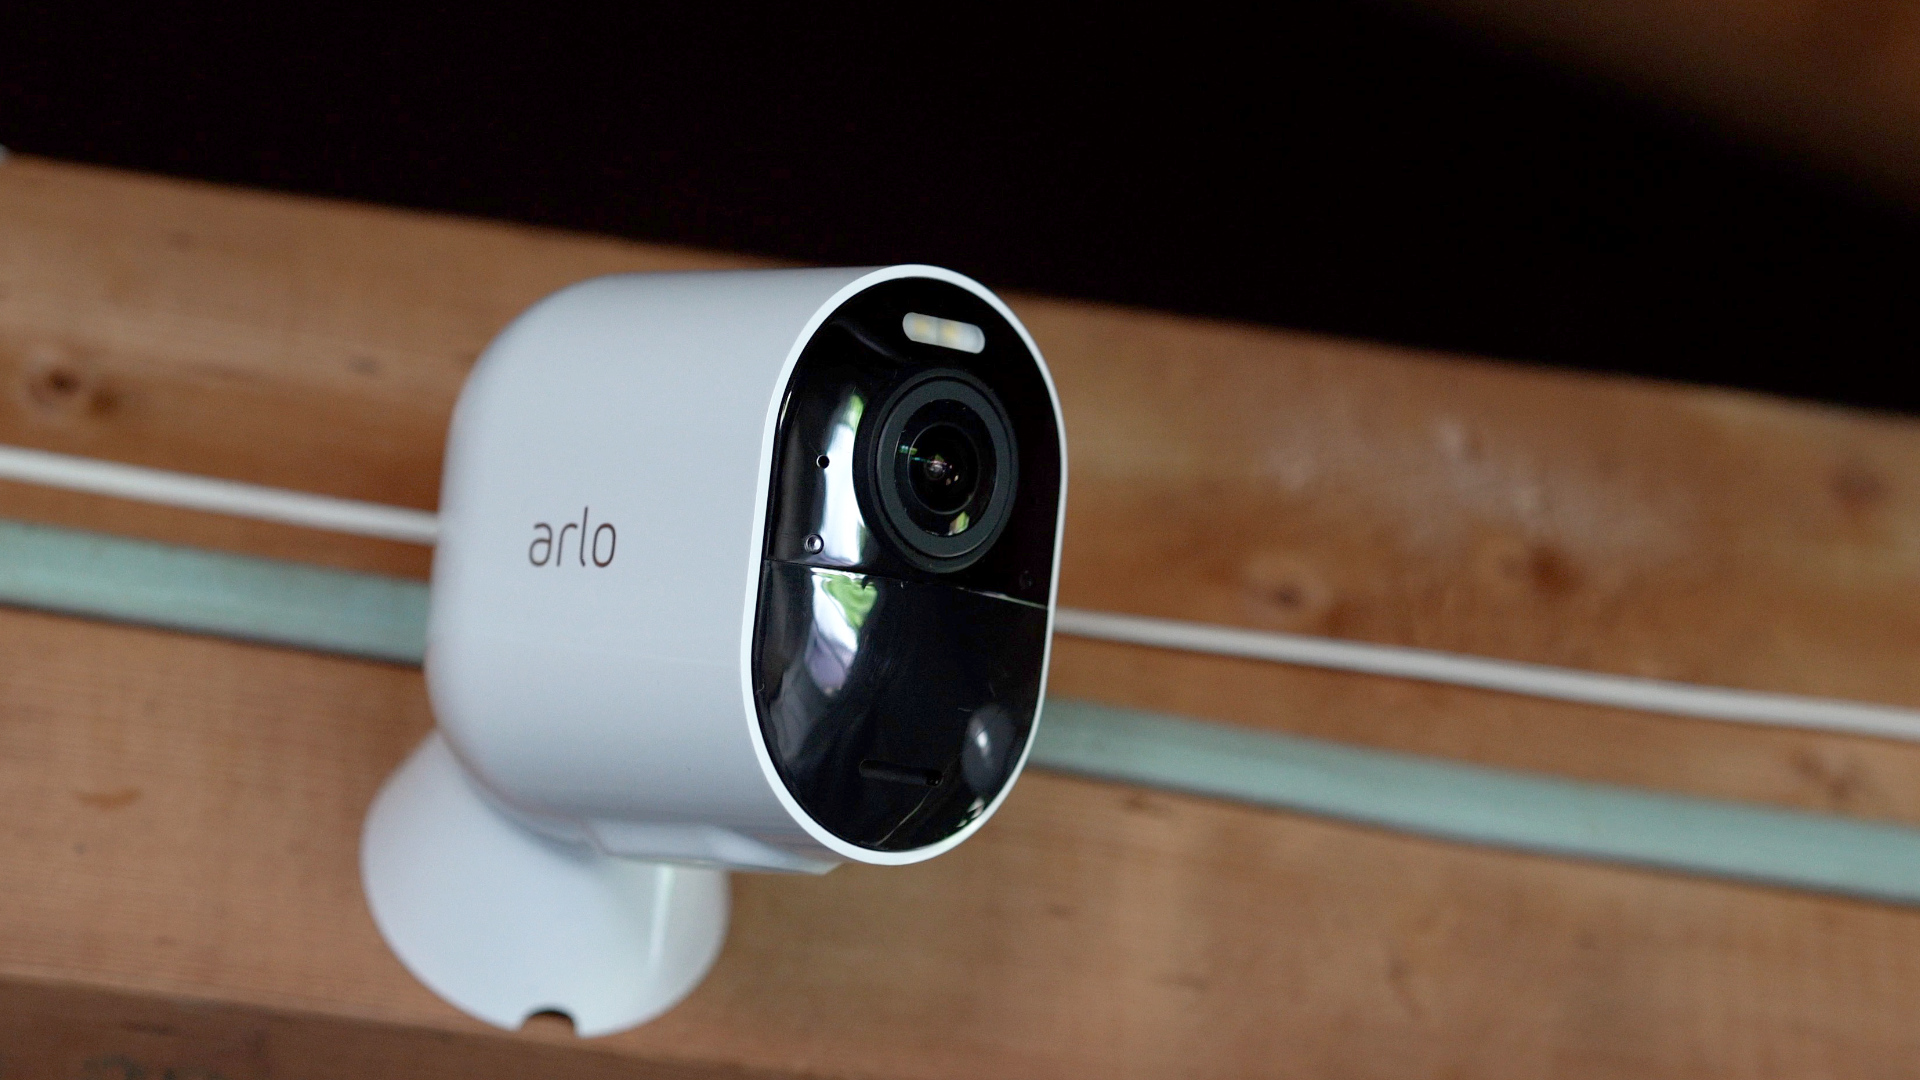 roestvrij Destructief Kinderen Arlo Ultra 4K is a more capable wireless security camera system - 9to5Mac